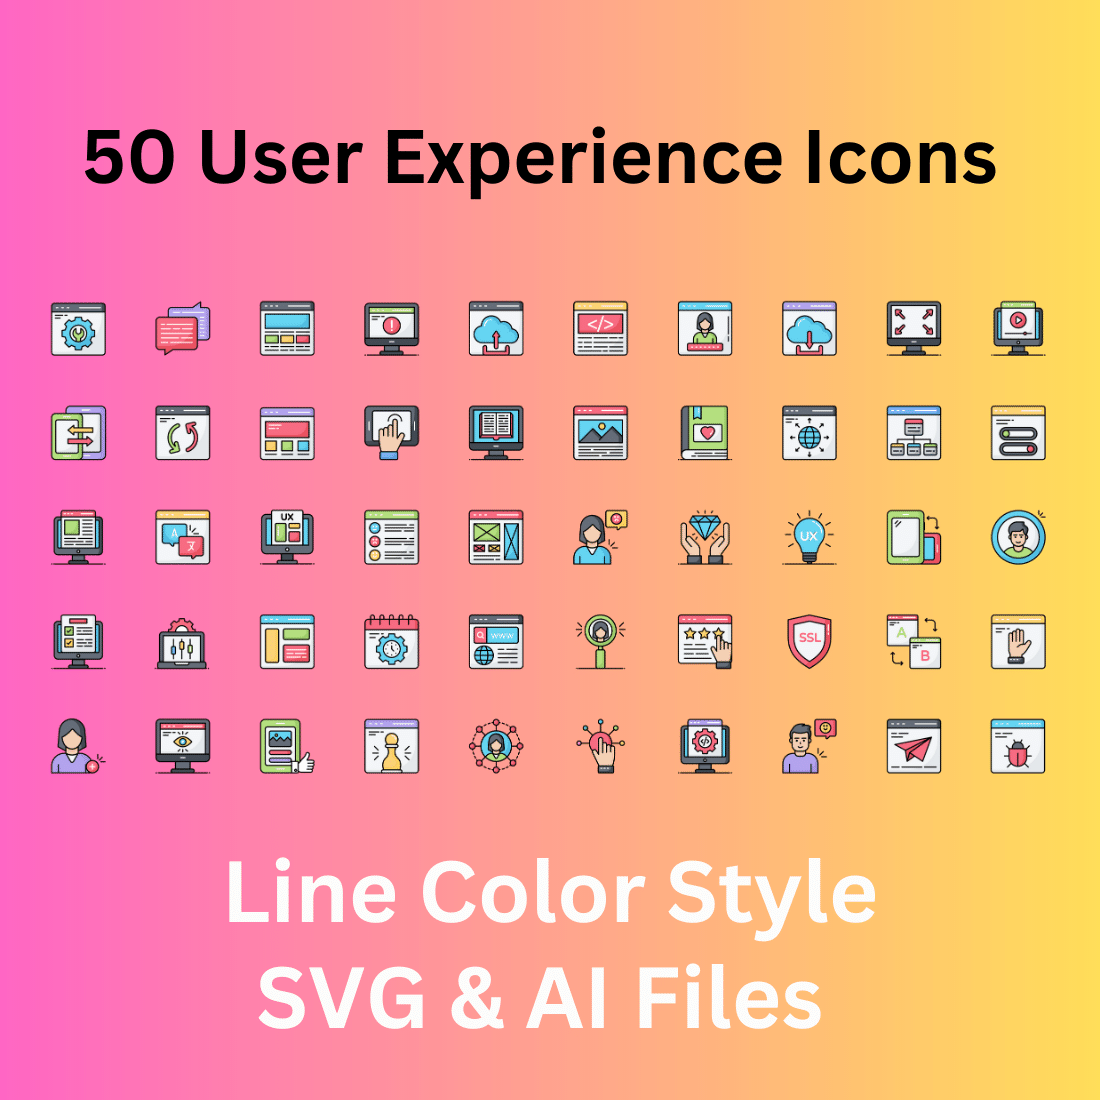 User Experience Icon Set 50 Line Color Icons - SVG And AI Files cover image.